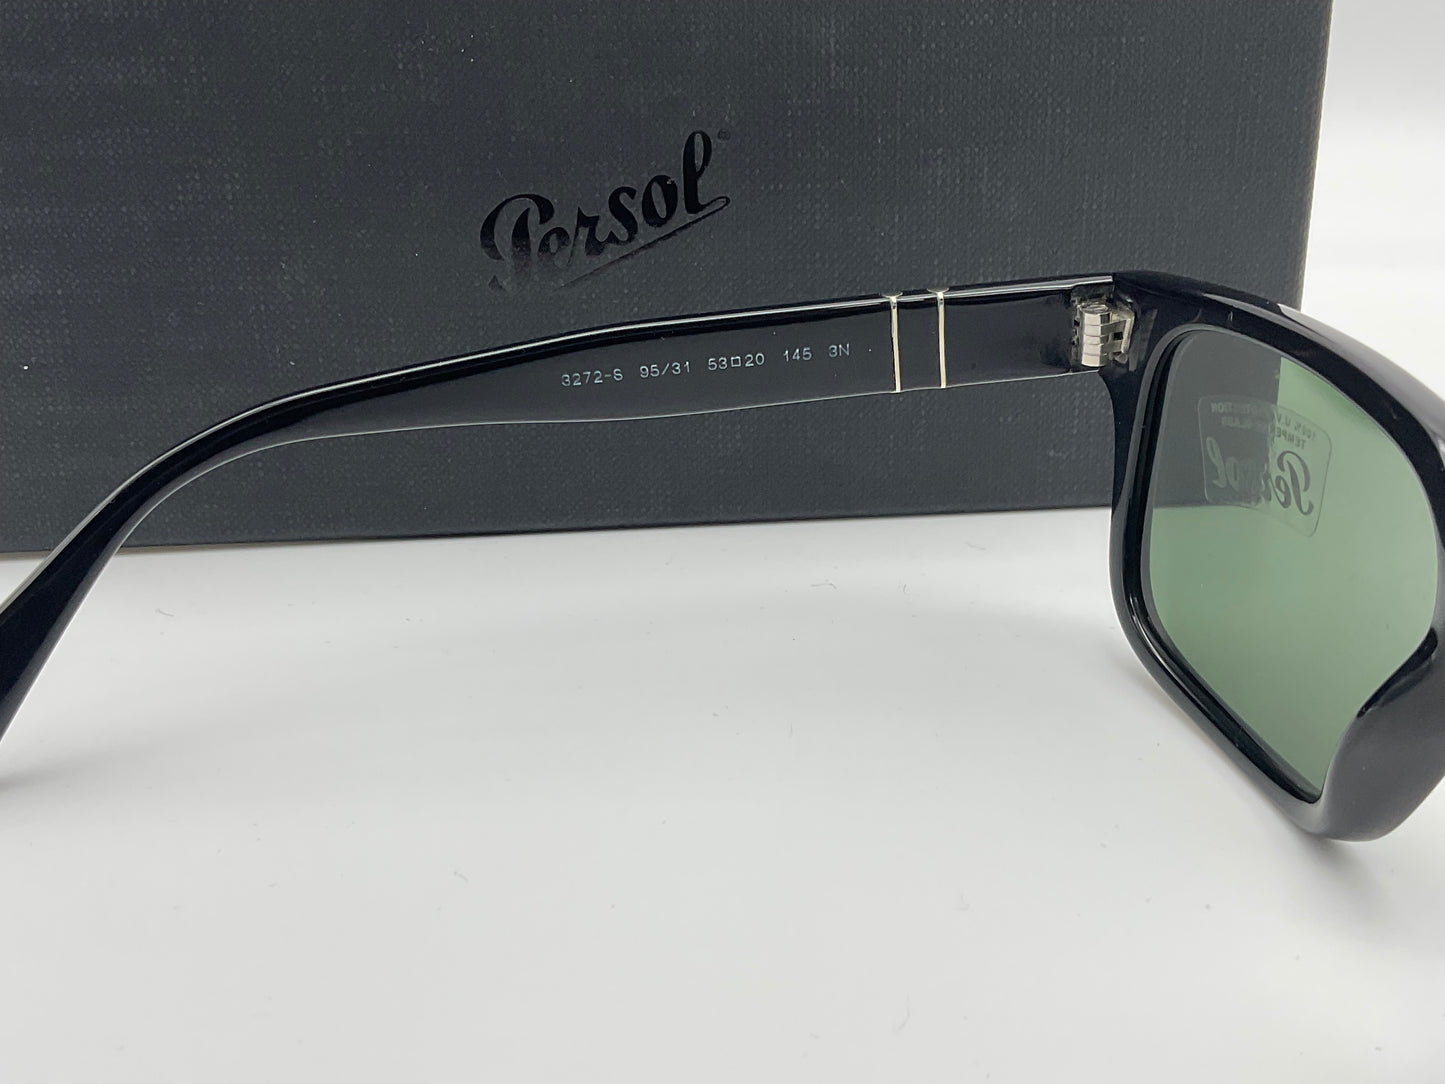 Persol PO 3272 55mm 95/31 Black Green Glass lenses Made in Italy